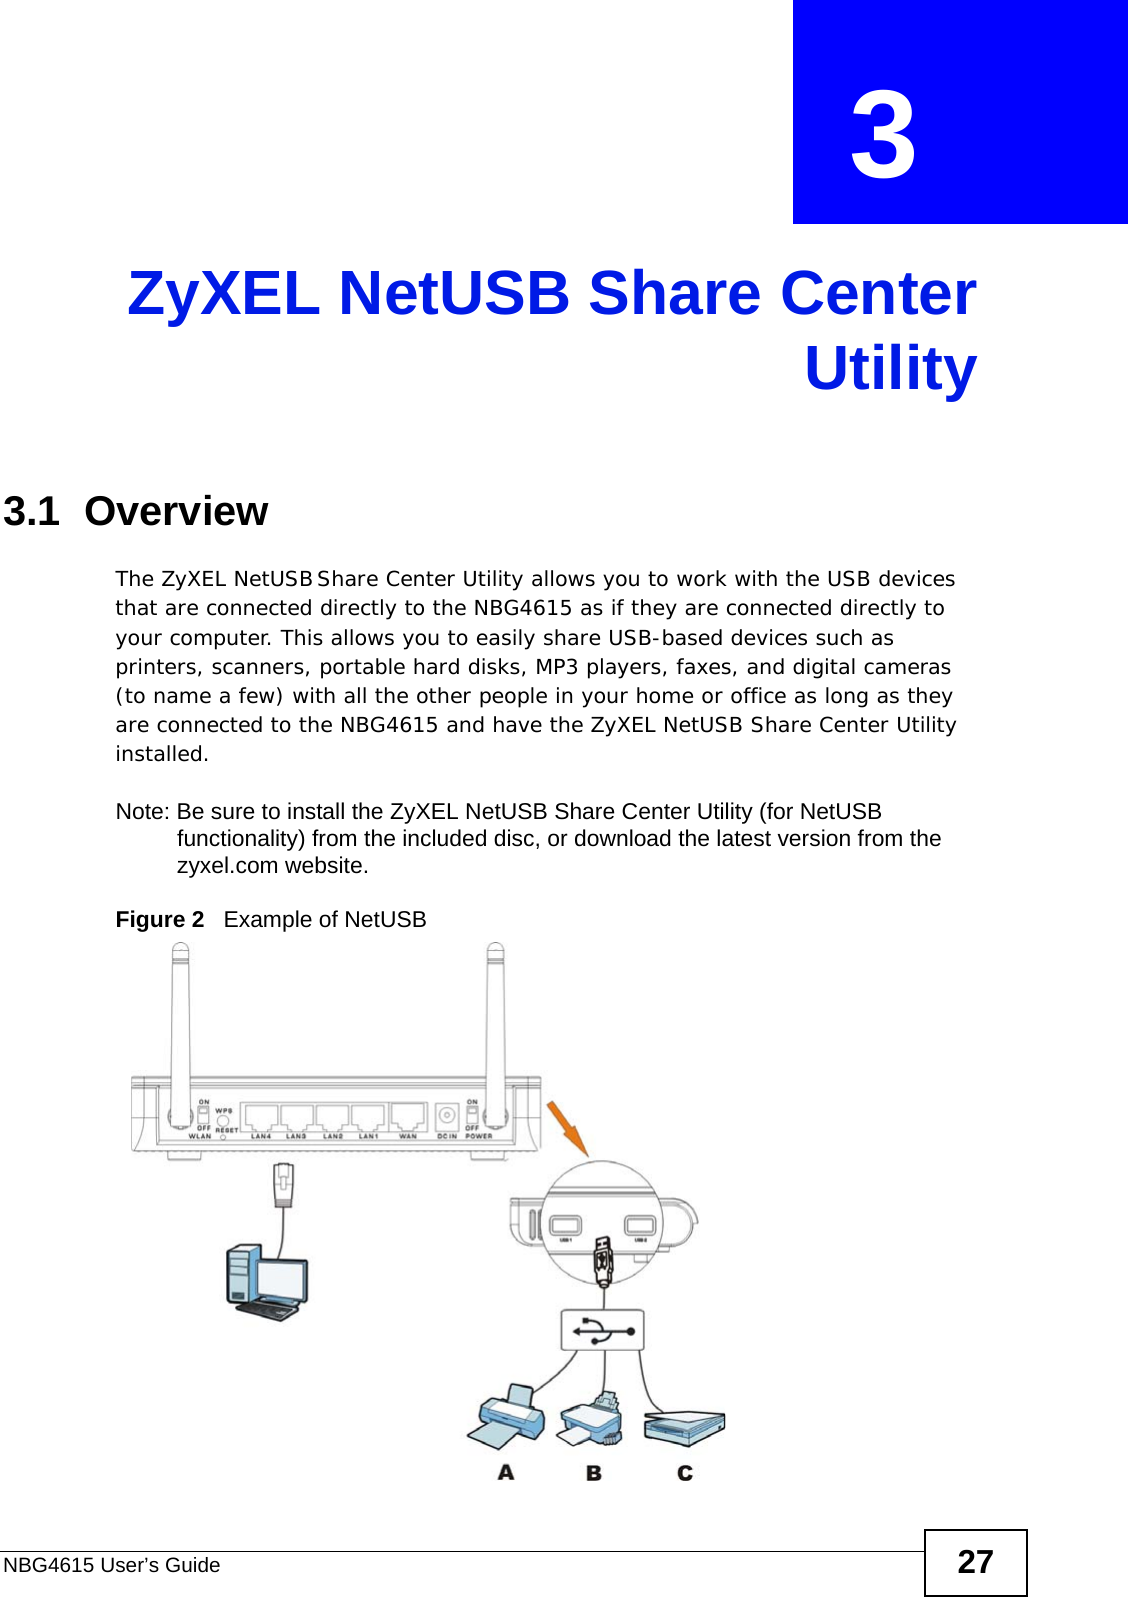 NBG4615 User’s Guide 27CHAPTER  3 ZyXEL NetUSB Share CenterUtility3.1  OverviewThe ZyXEL NetUSB Share Center Utility allows you to work with the USB devices that are connected directly to the NBG4615 as if they are connected directly to your computer. This allows you to easily share USB-based devices such as printers, scanners, portable hard disks, MP3 players, faxes, and digital cameras (to name a few) with all the other people in your home or office as long as they are connected to the NBG4615 and have the ZyXEL NetUSB Share Center Utility installed.Note: Be sure to install the ZyXEL NetUSB Share Center Utility (for NetUSB functionality) from the included disc, or download the latest version from the zyxel.com website.Figure 2   Example of NetUSB